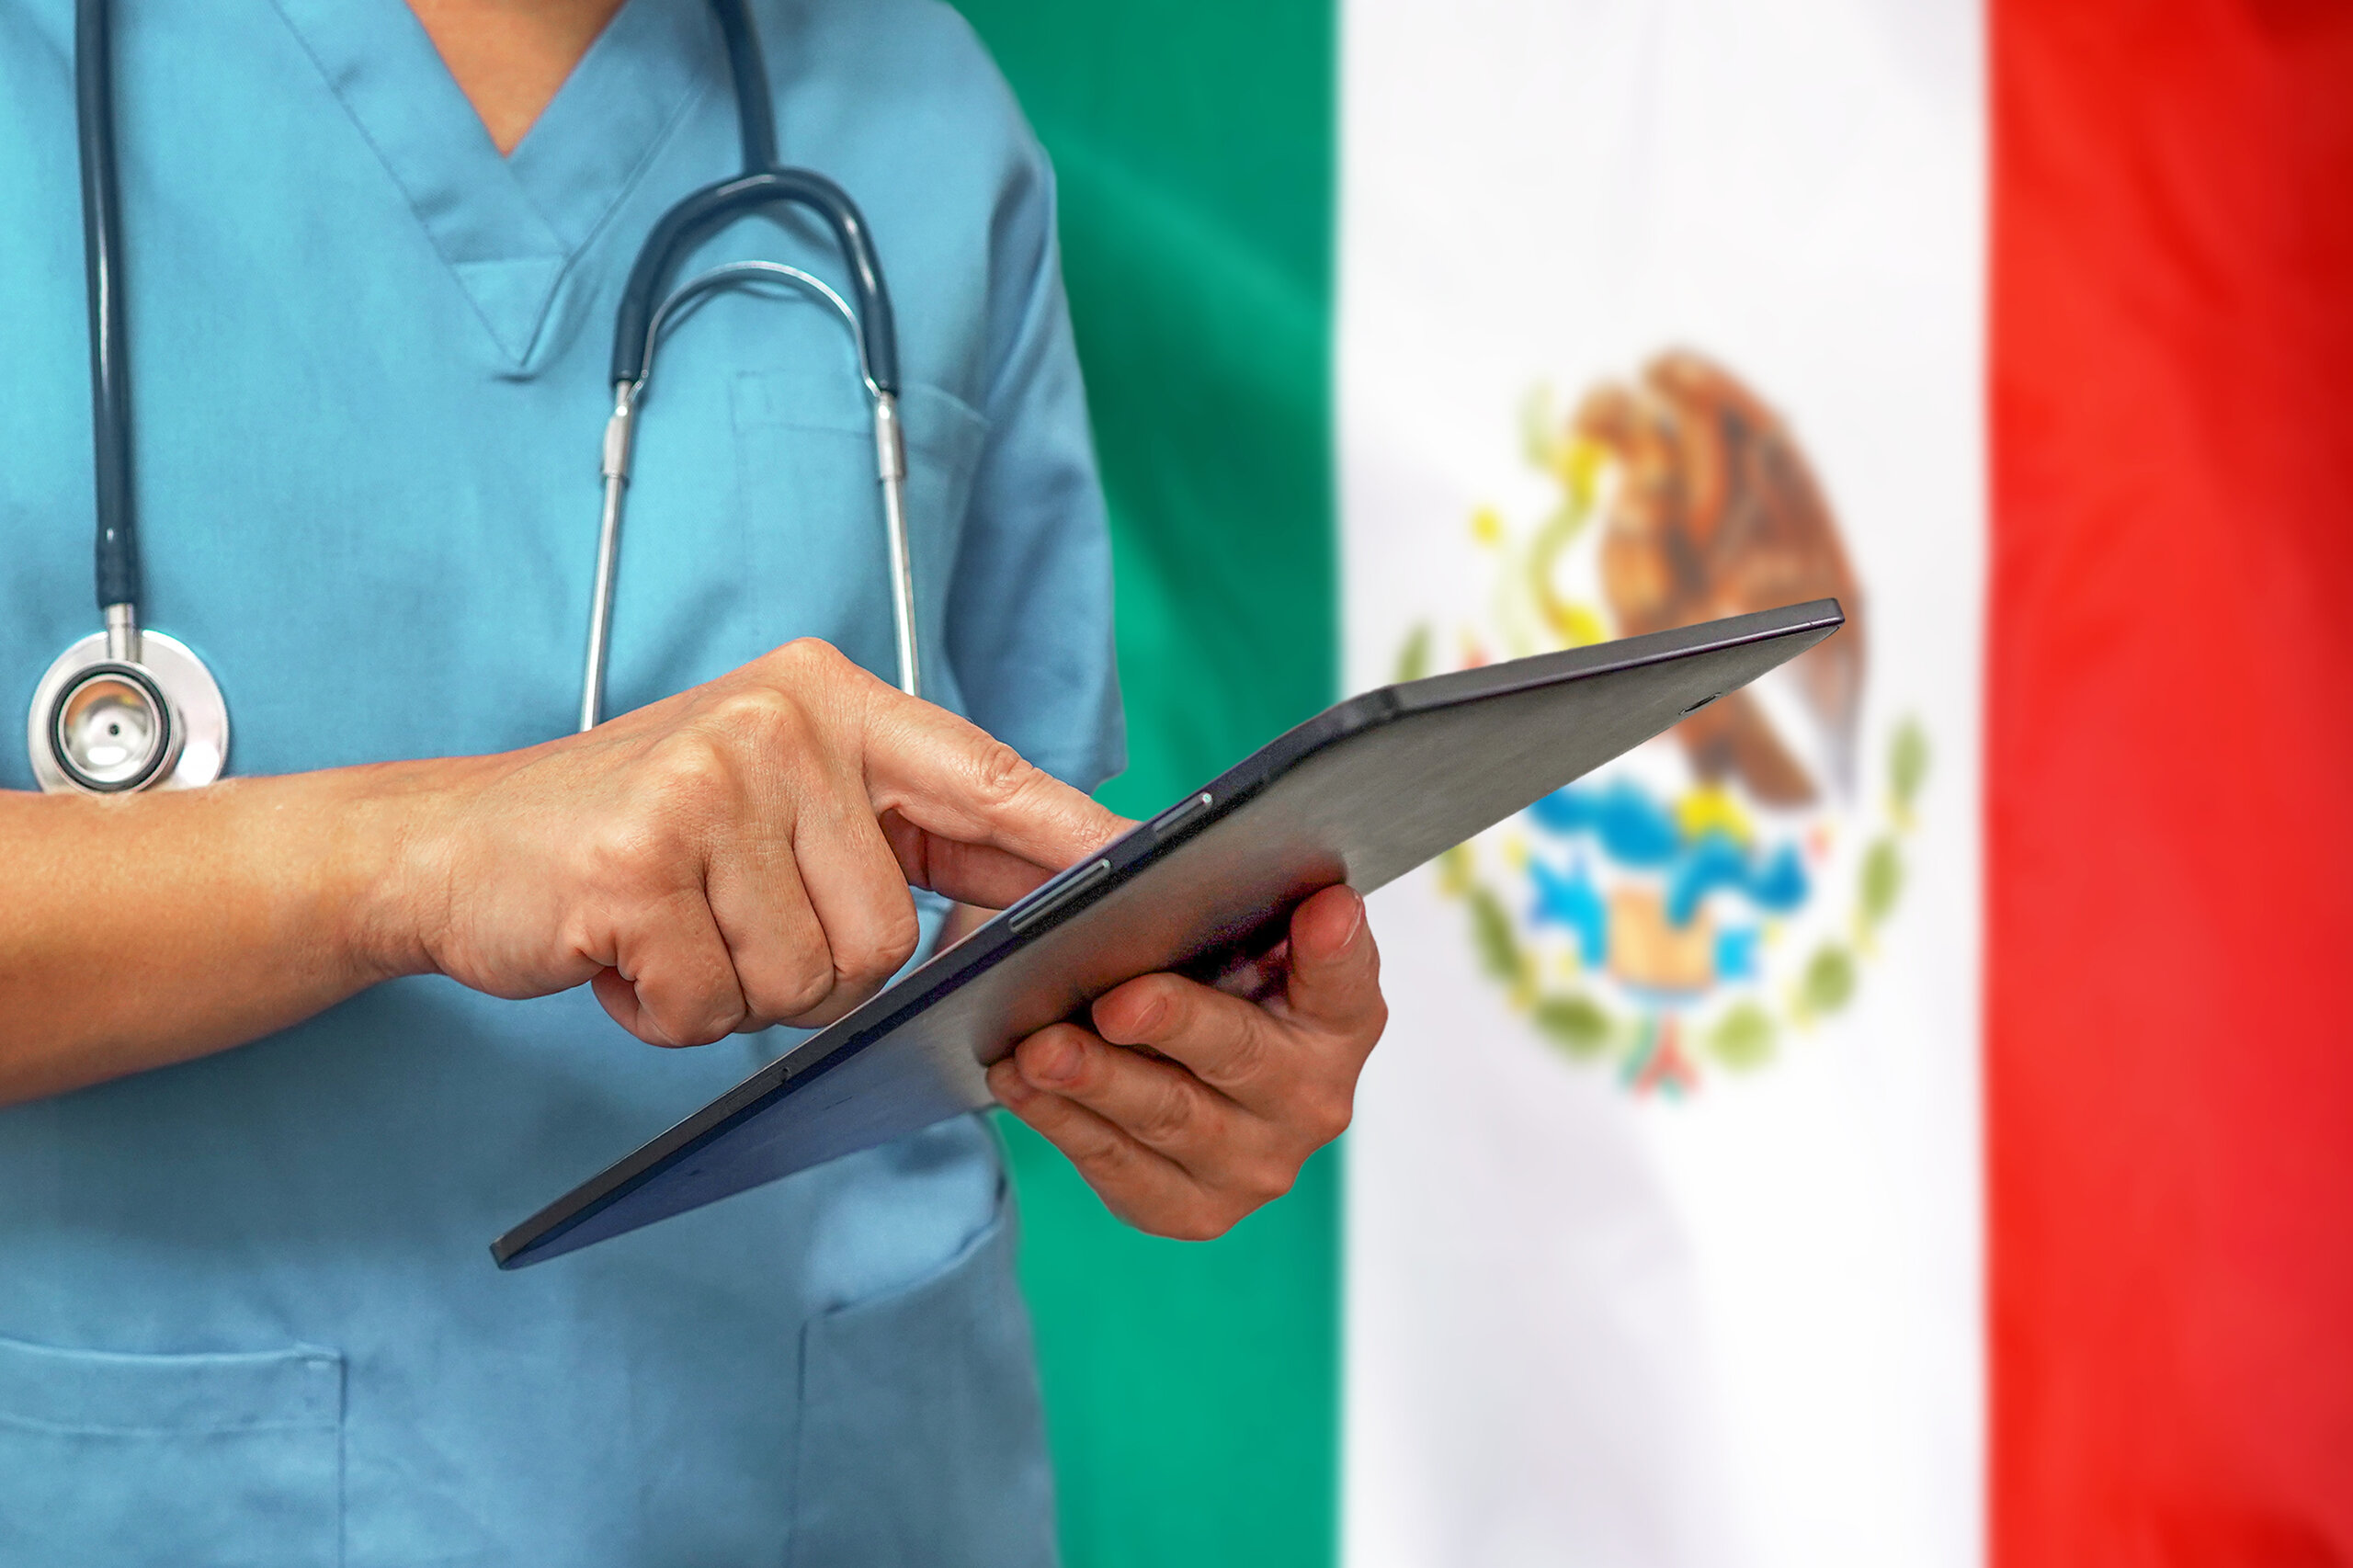 Surgeon or doctor using a digital tablet on the background of the Mexico flag. Medical equipment or medical network, technology and diagnostics in Mexico.